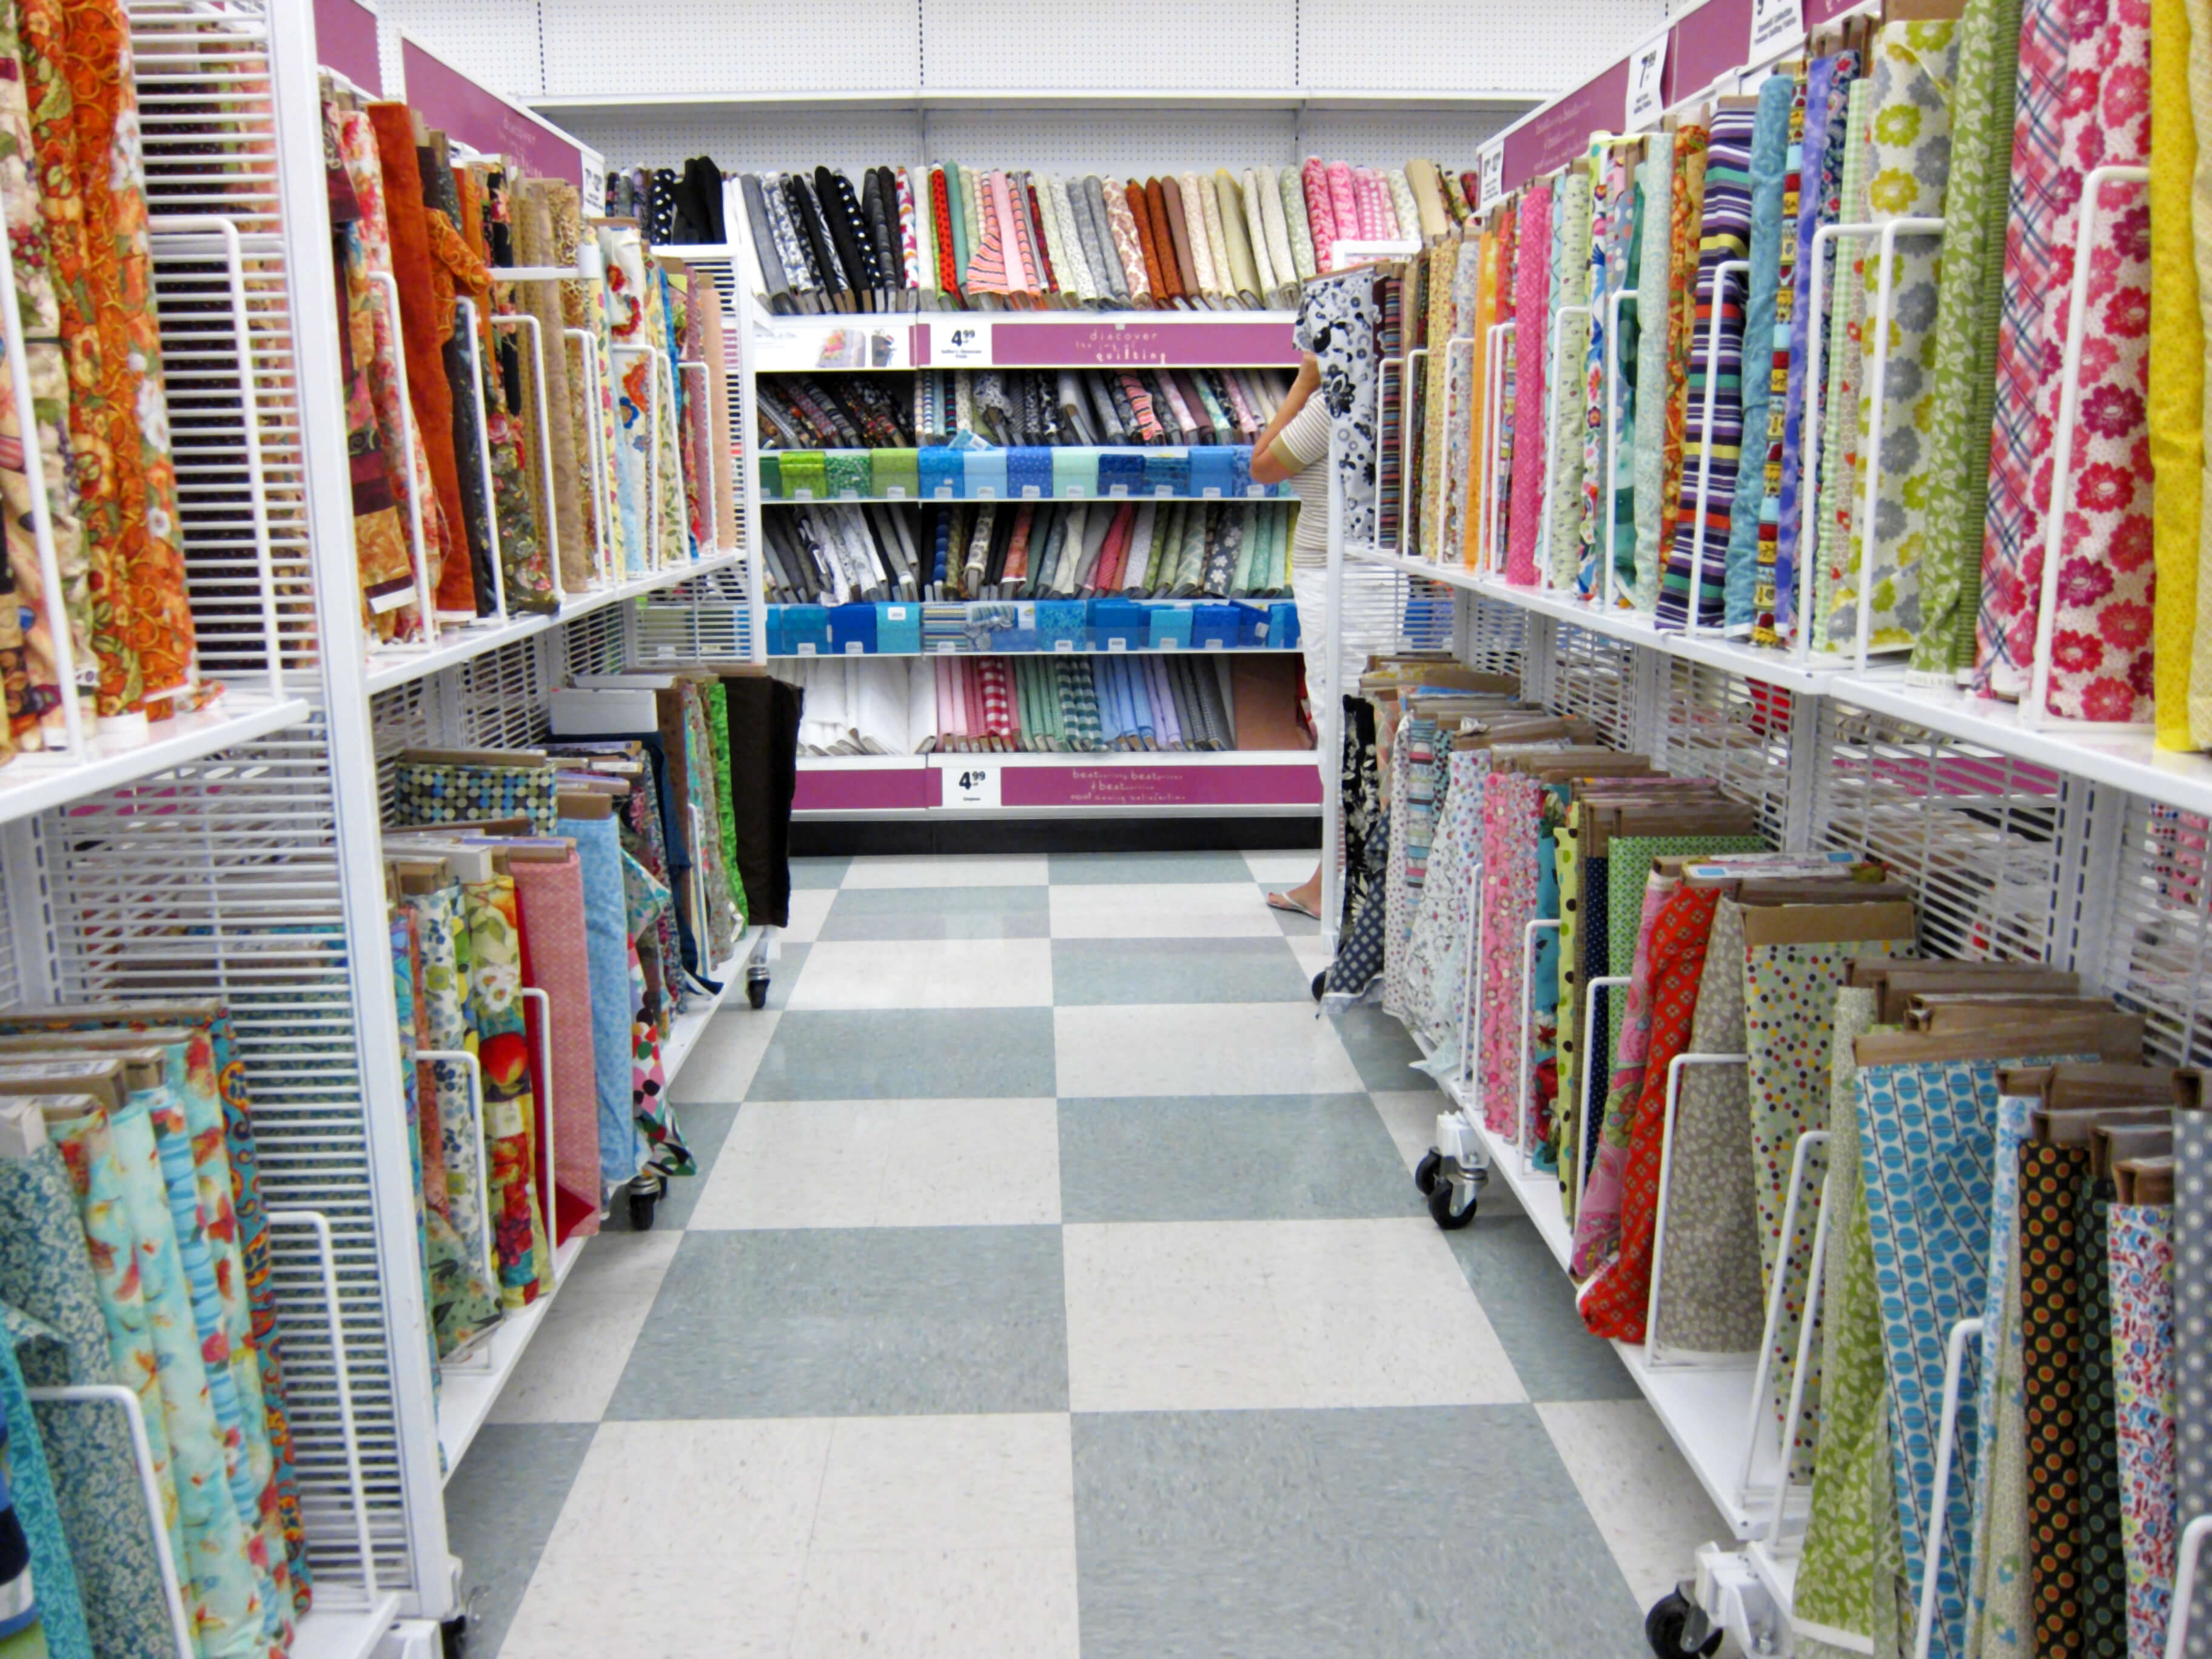 How much does it cost to open a fabric store?